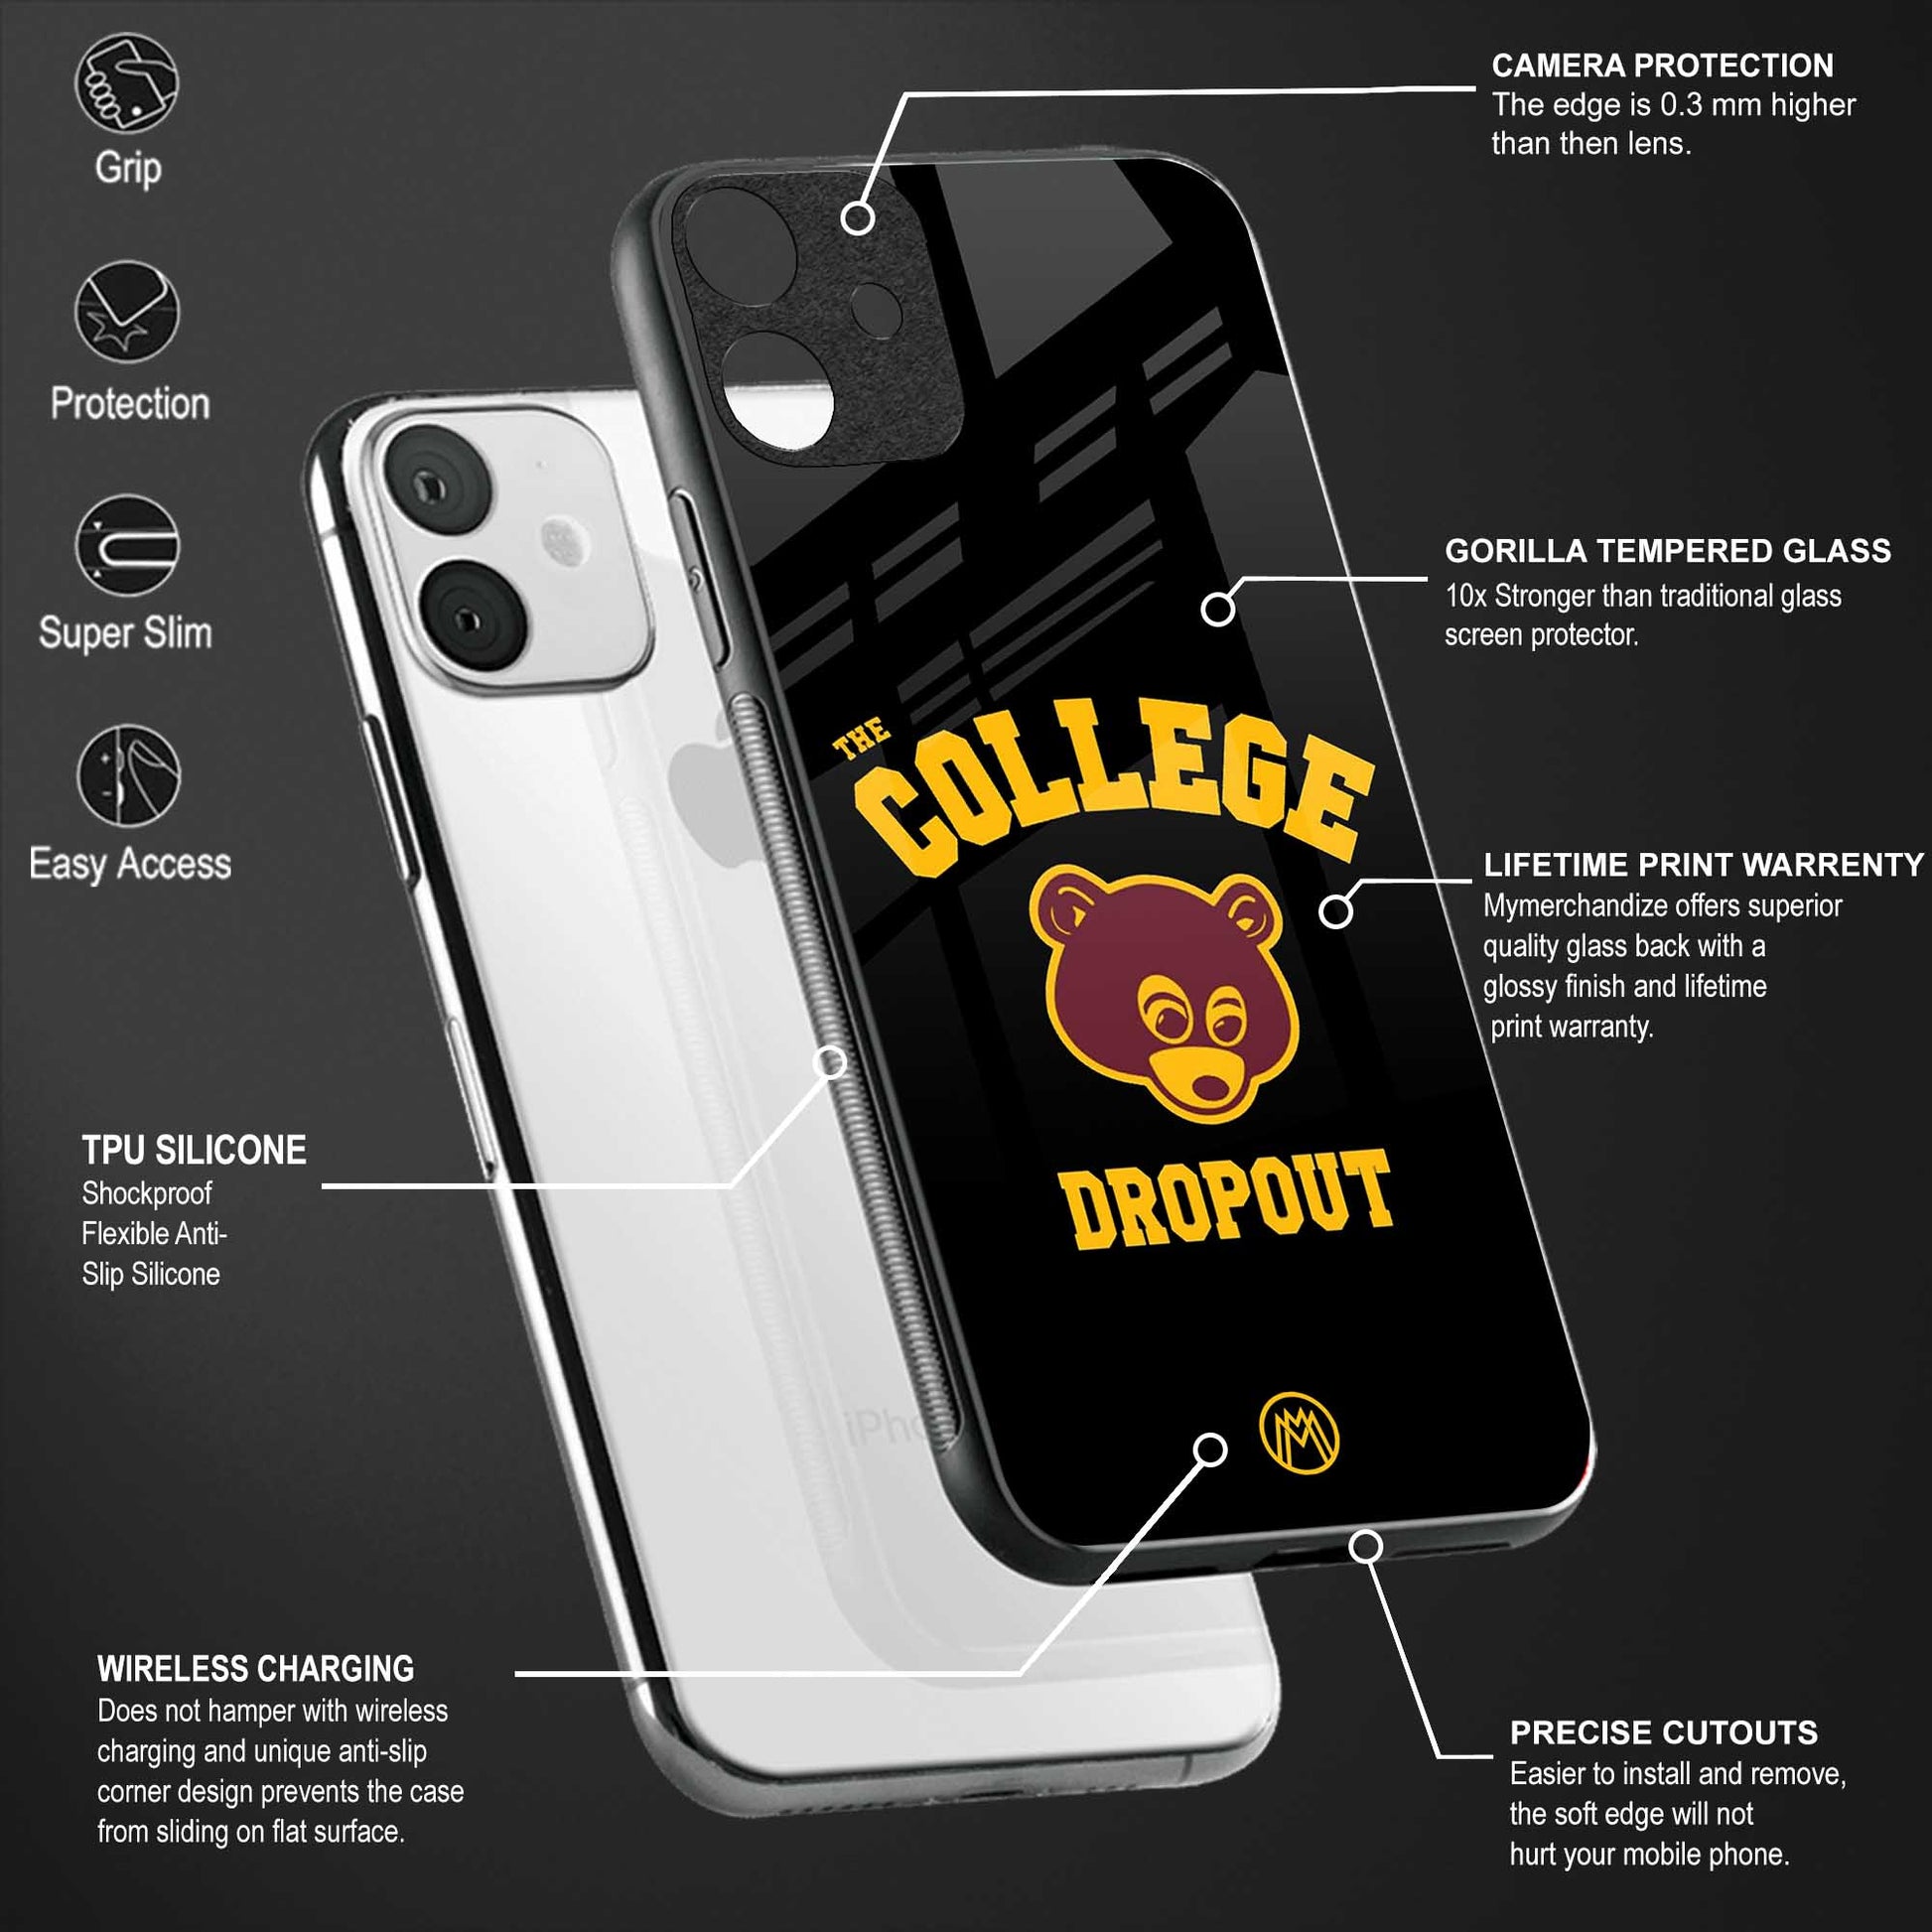 the college dropout back phone cover | glass case for samsung galaxy m33 5g